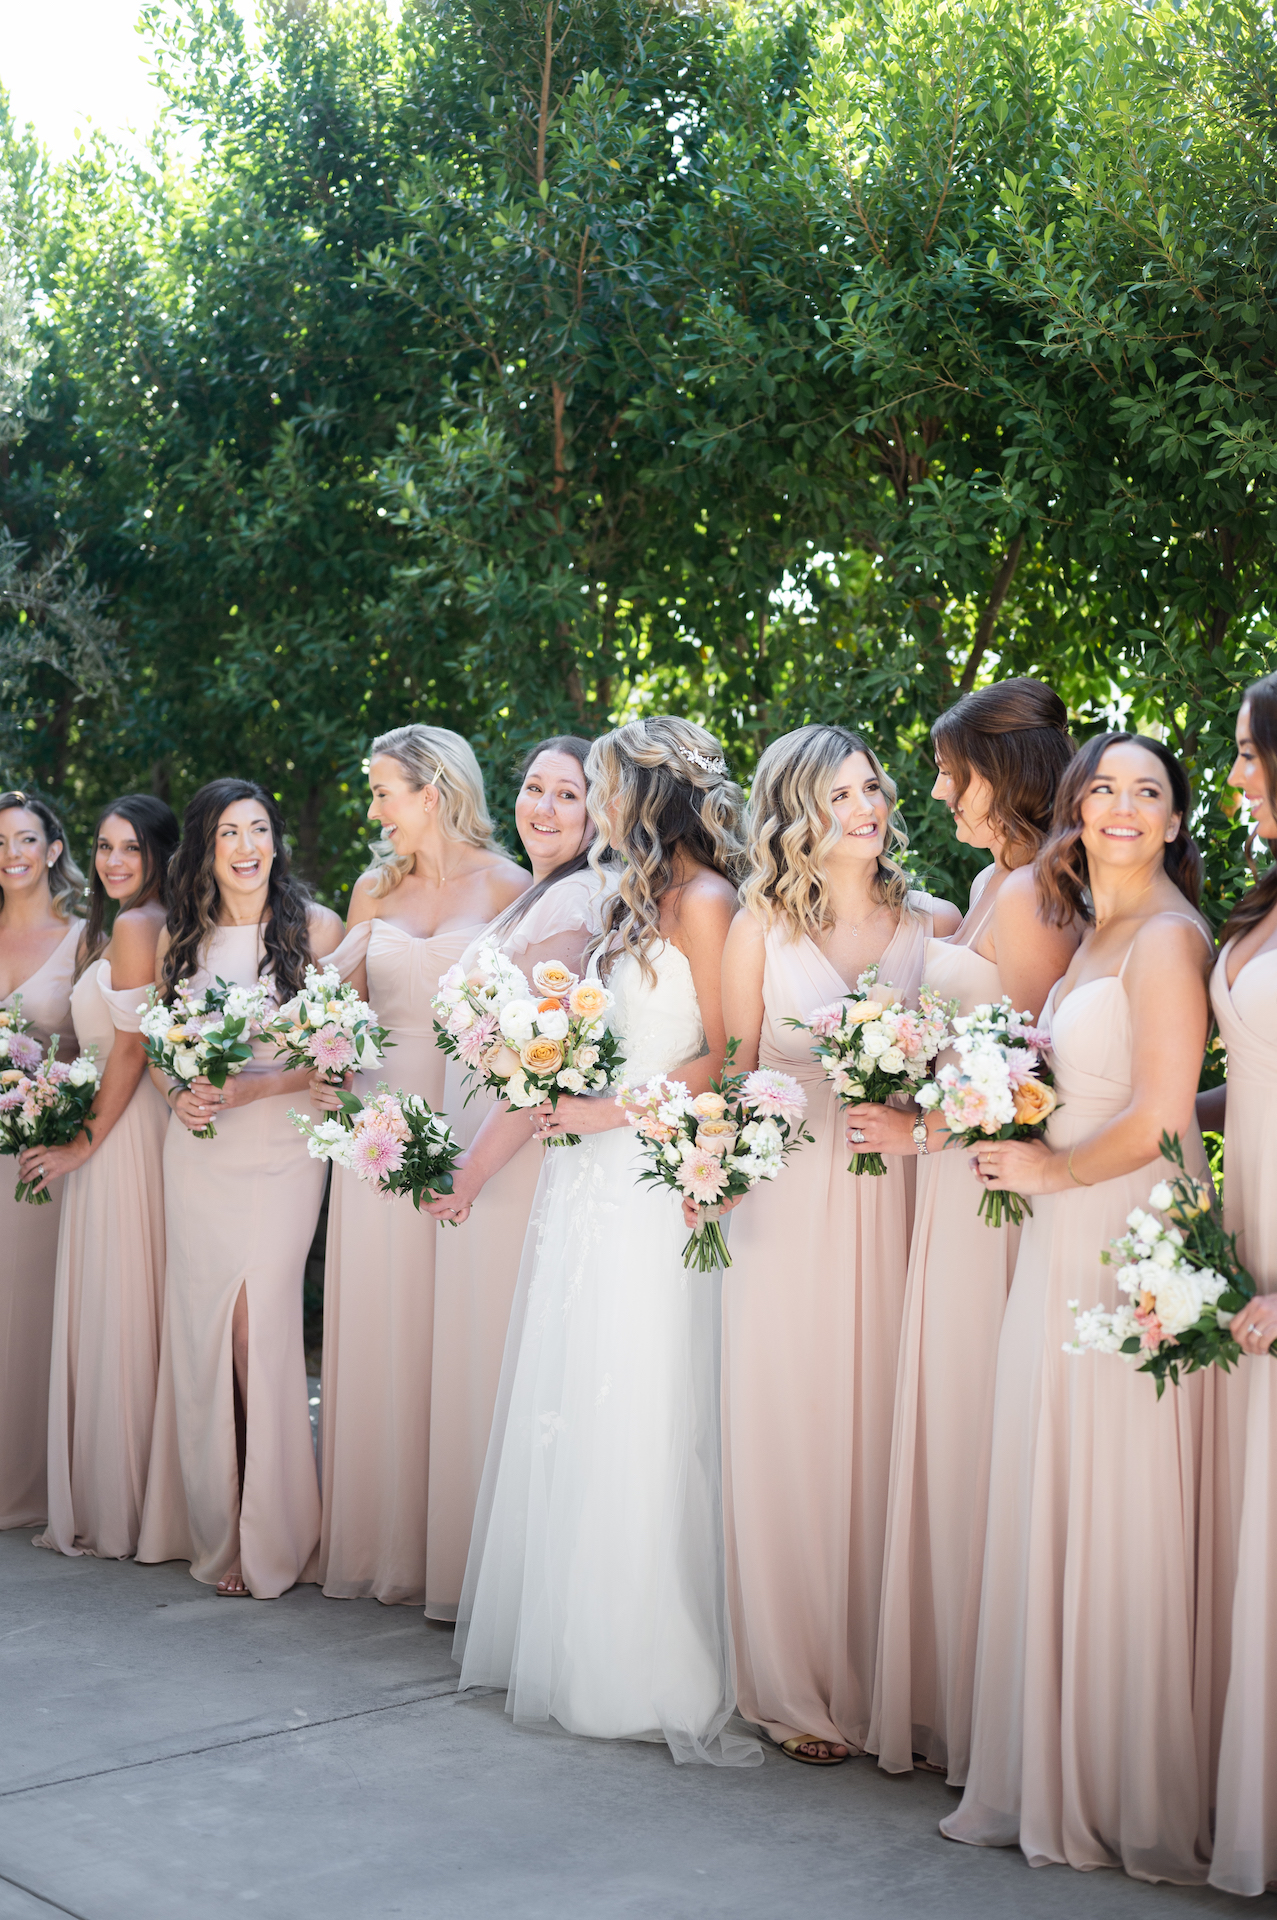 Bride and bridesmaids standing in row, smiling at each other. Bridesmaids in dusty pink dresses.